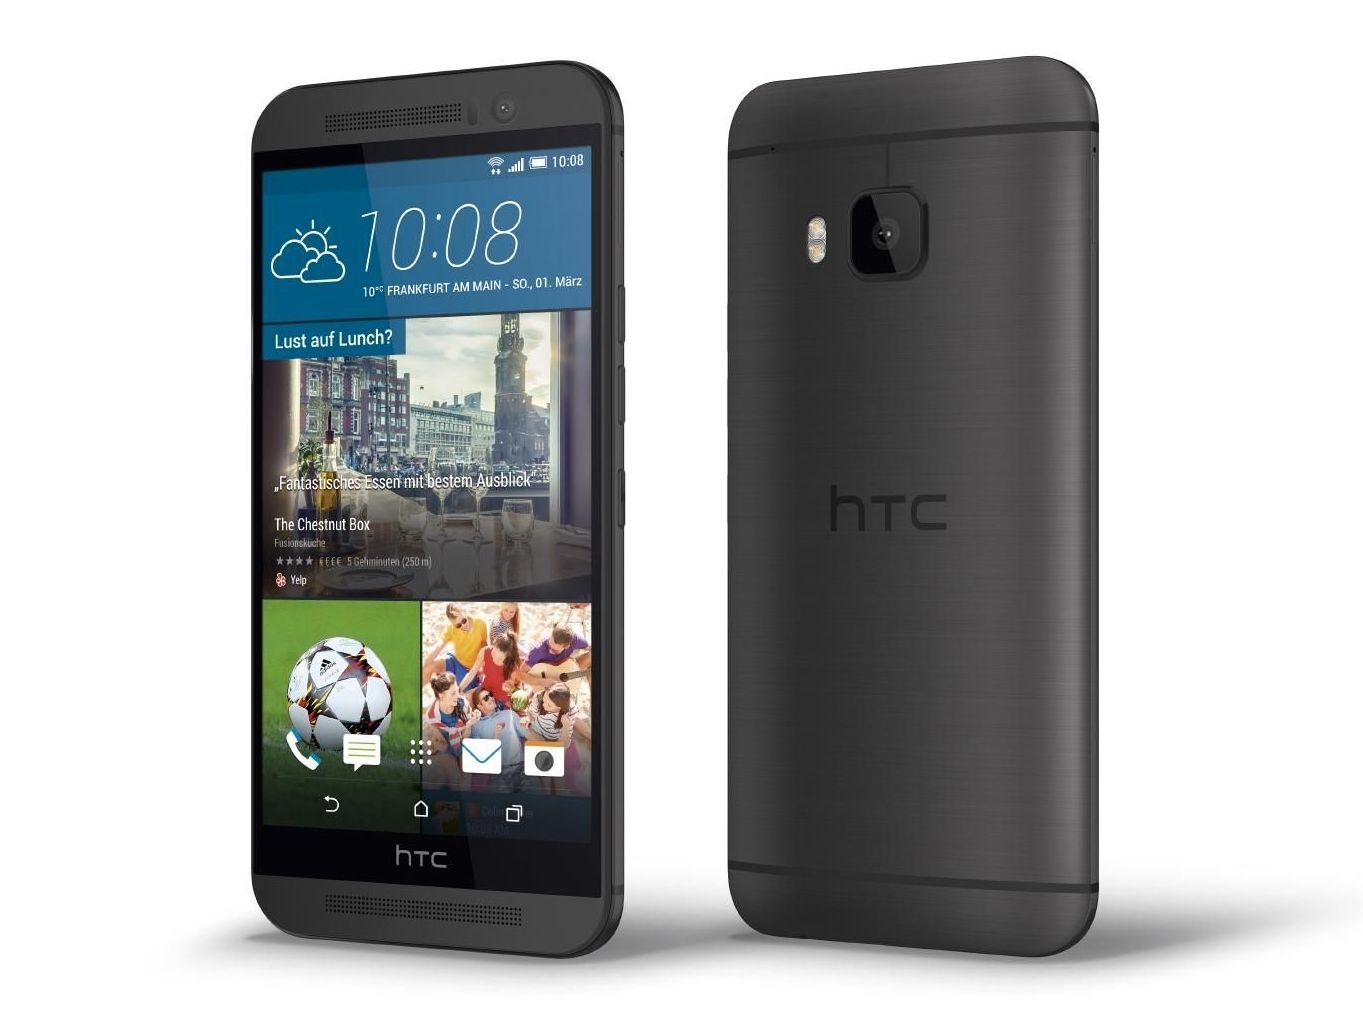 This Suspected Htc One M9 Plus Wallpaper Suggests A Quad HD Display